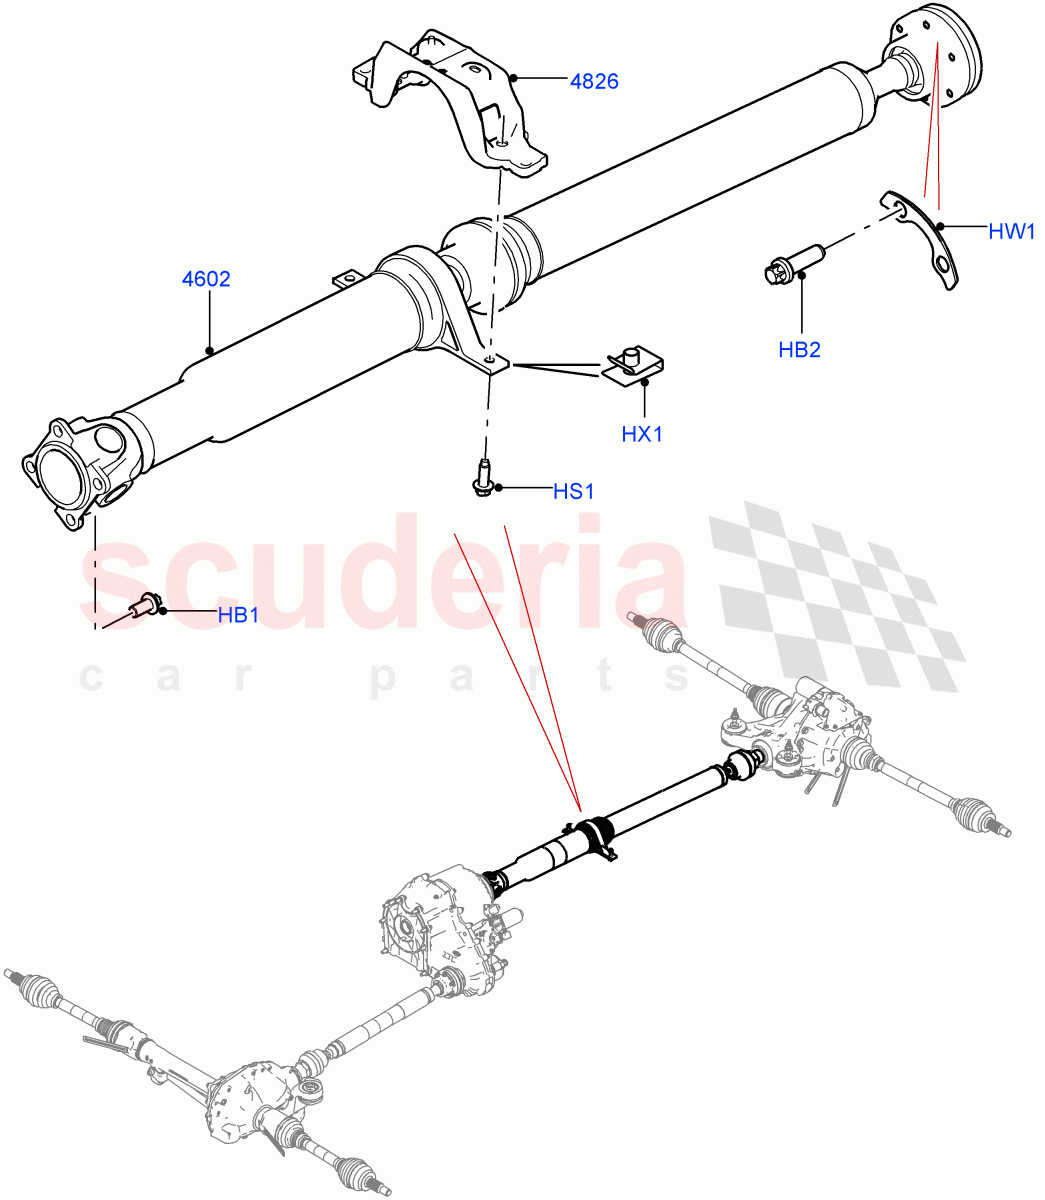 Drive Shaft - Rear Axle Drive(Solihull Plant Build, Propshaft)((V)FROMHA000001) of Land Rover Land Rover Discovery 5 (2017+) [2.0 Turbo Petrol AJ200P]